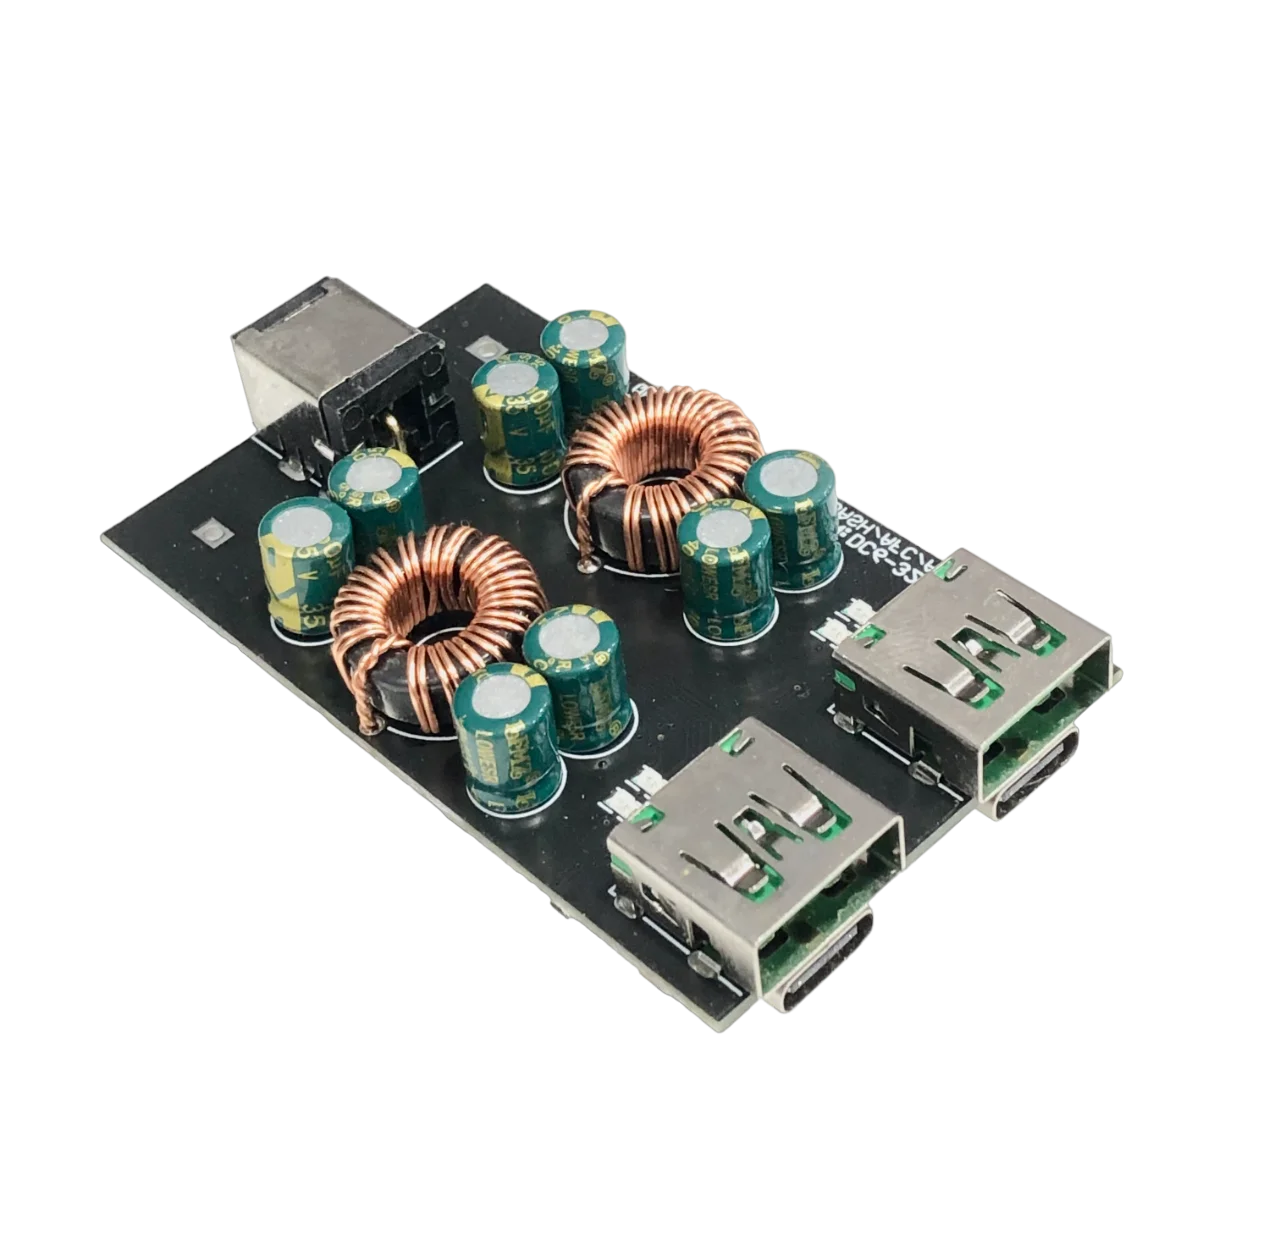 roboway sw3518s fast charging power module dc6 32v usb pd3.0 pps mobile phone fast charging board step down module 2 way